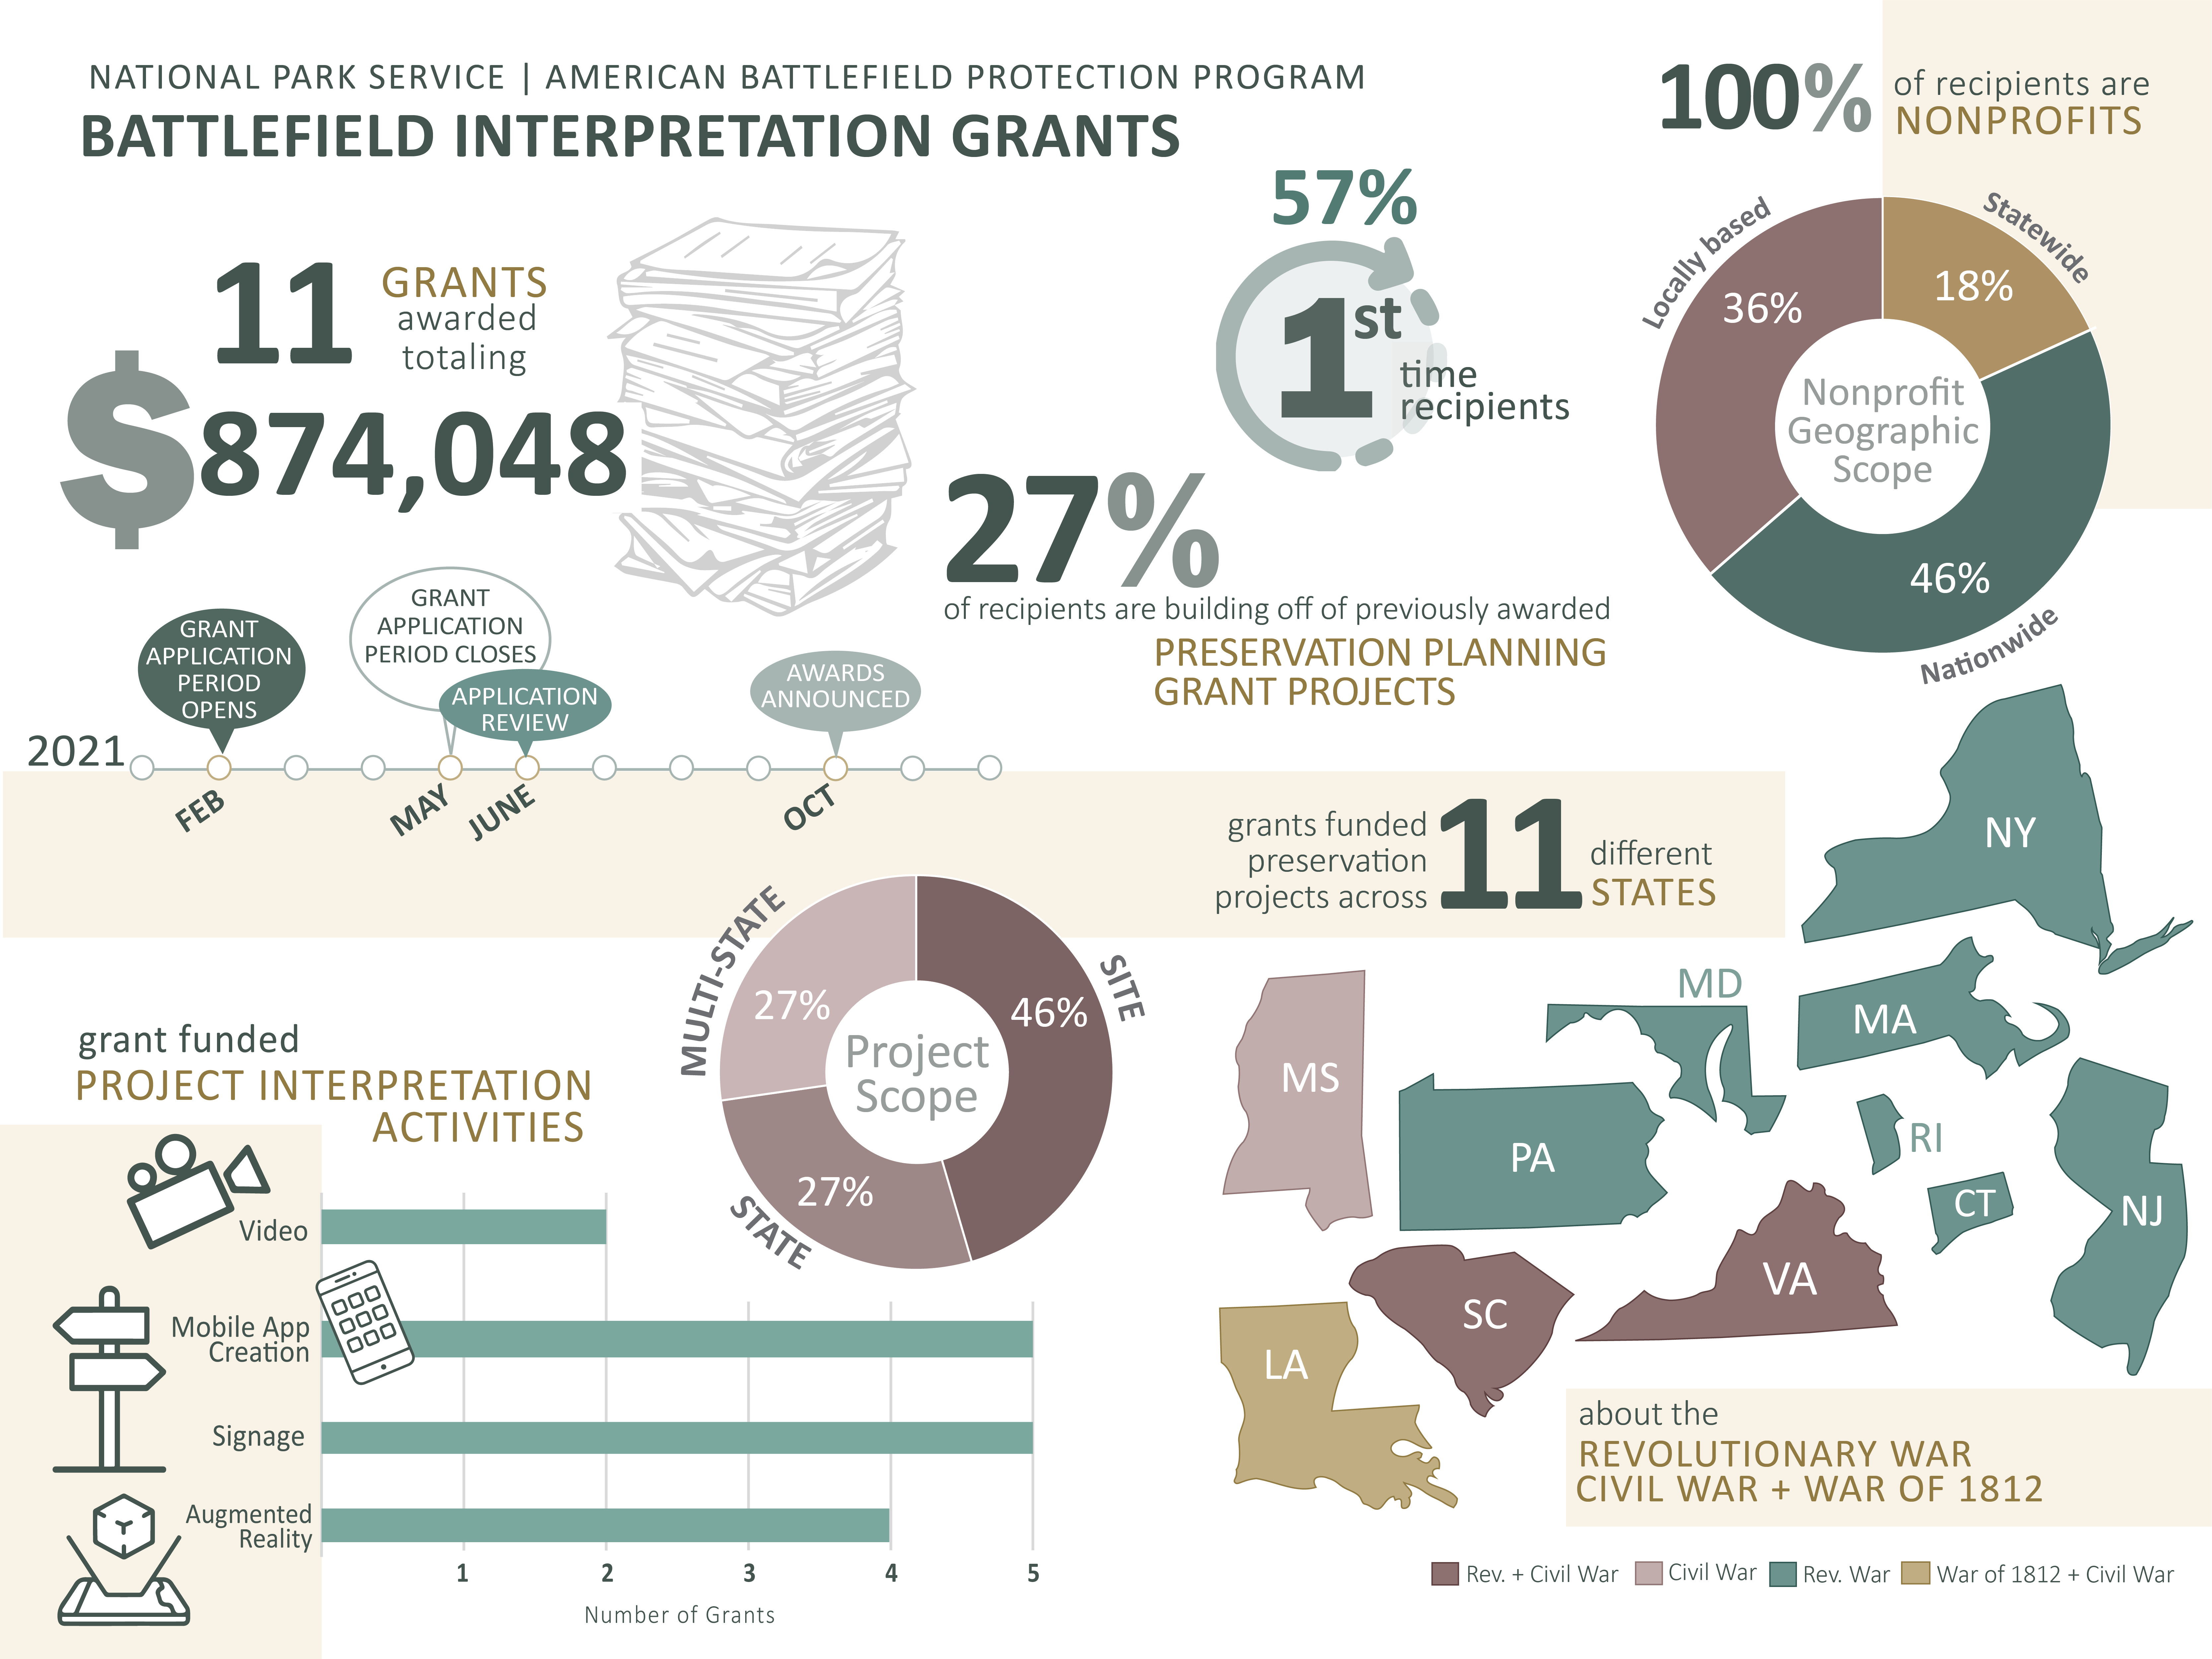 NPS ABPP Battlefield Interpretation Grant (BIG) stats from 2021. “A total $874,048 awarded to 11 nonprofits.” Donut graph shows “36% of the nonprofits were locally based, 18% were statewide nonprofits and 46% were nationwide.” Timeline shows the 2021 gran